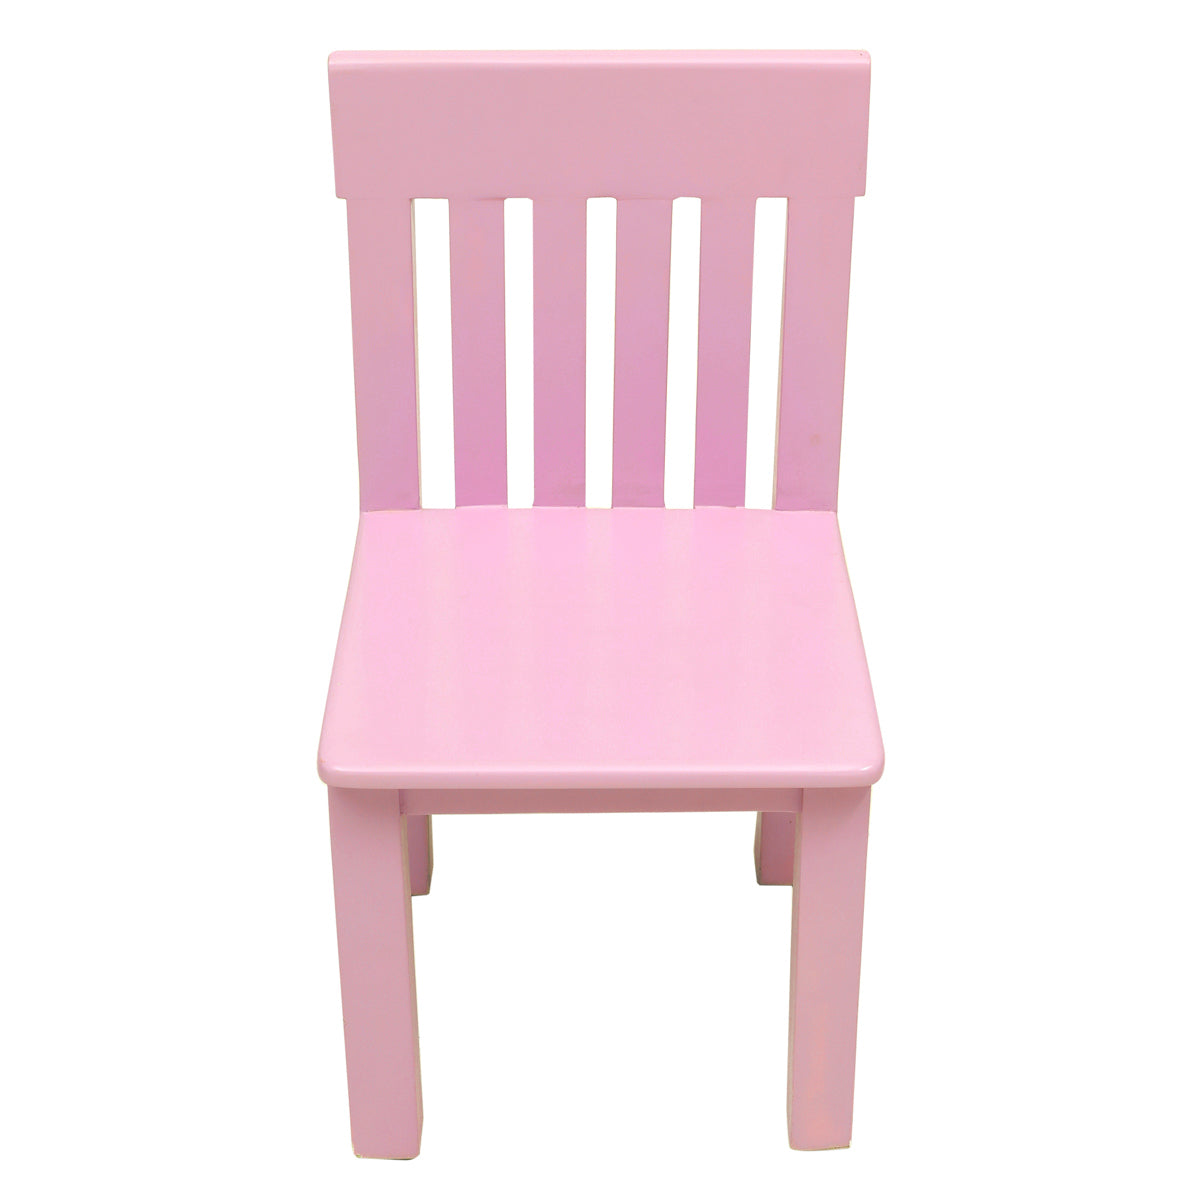 Kids Activity Chair Assorted - Pink